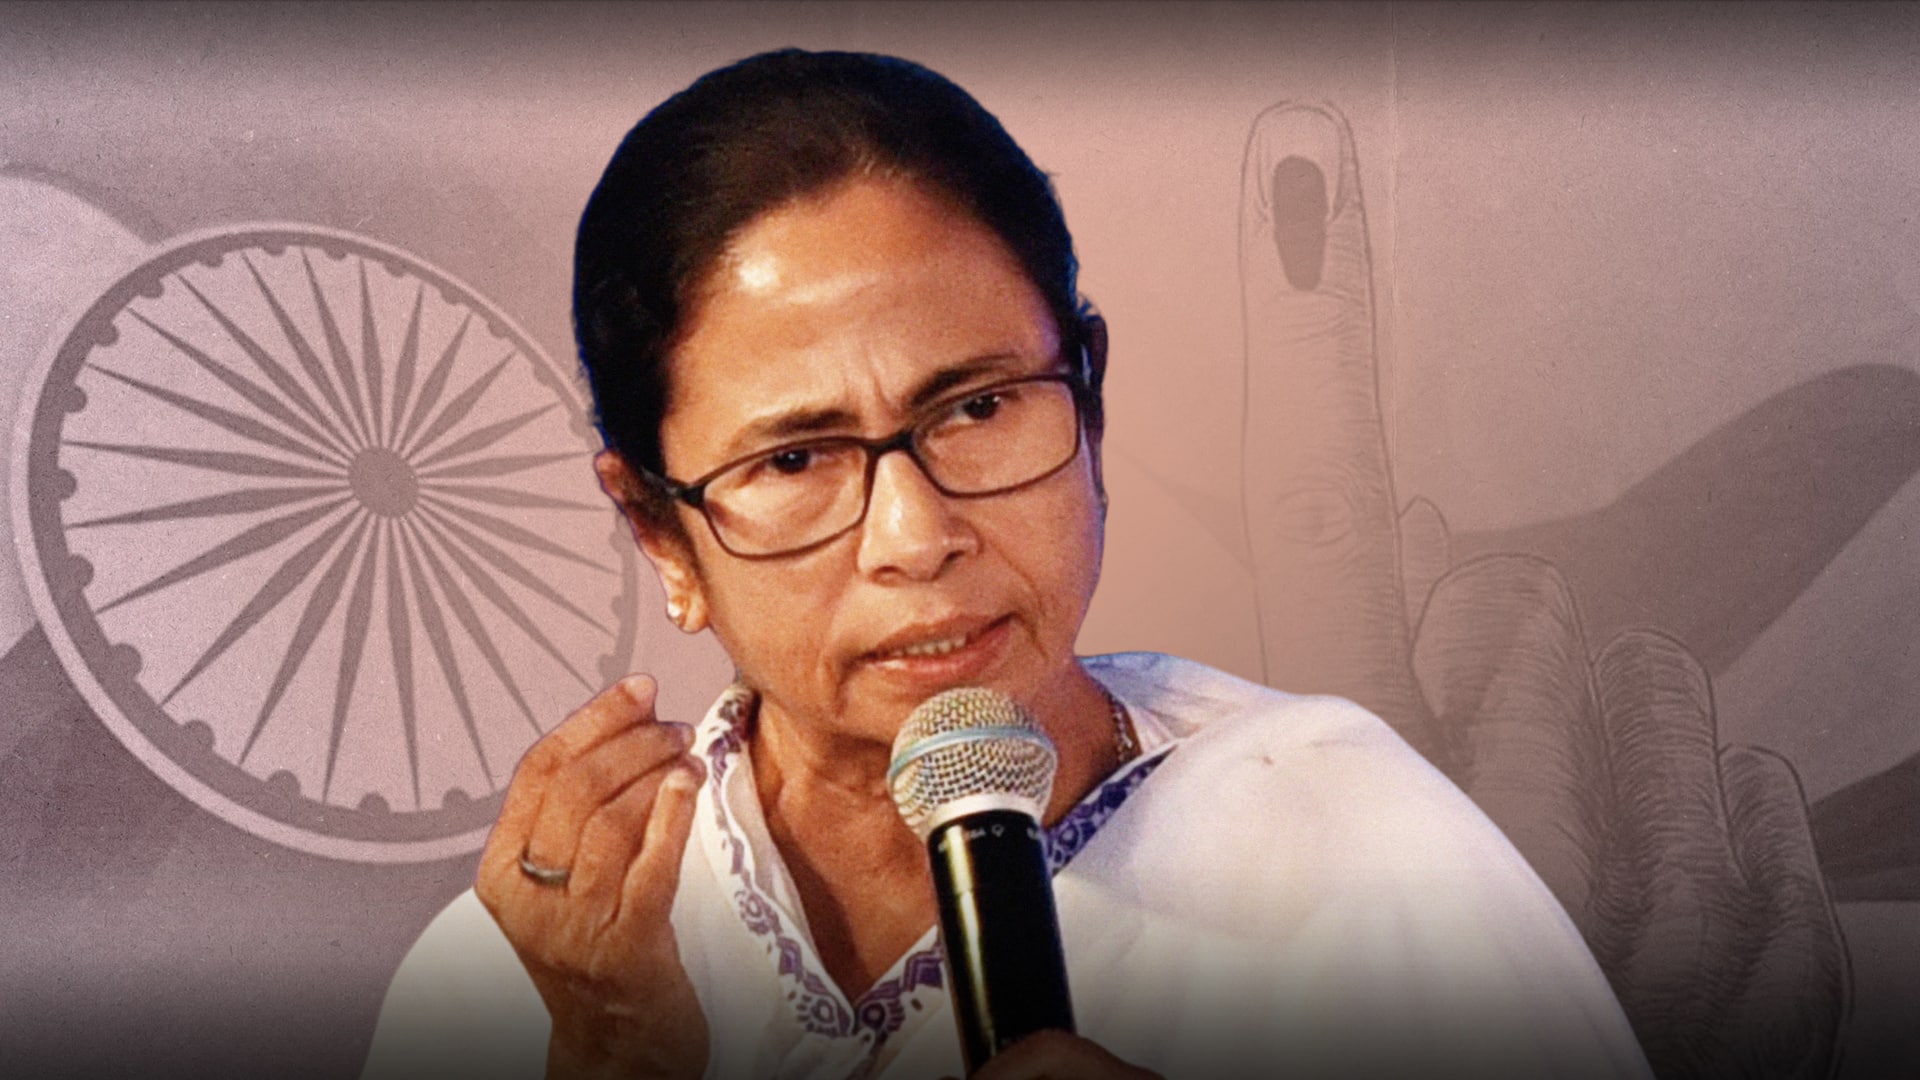 Don't agree with simultaneous polls concept: Mamata tells Kovind-led panel 